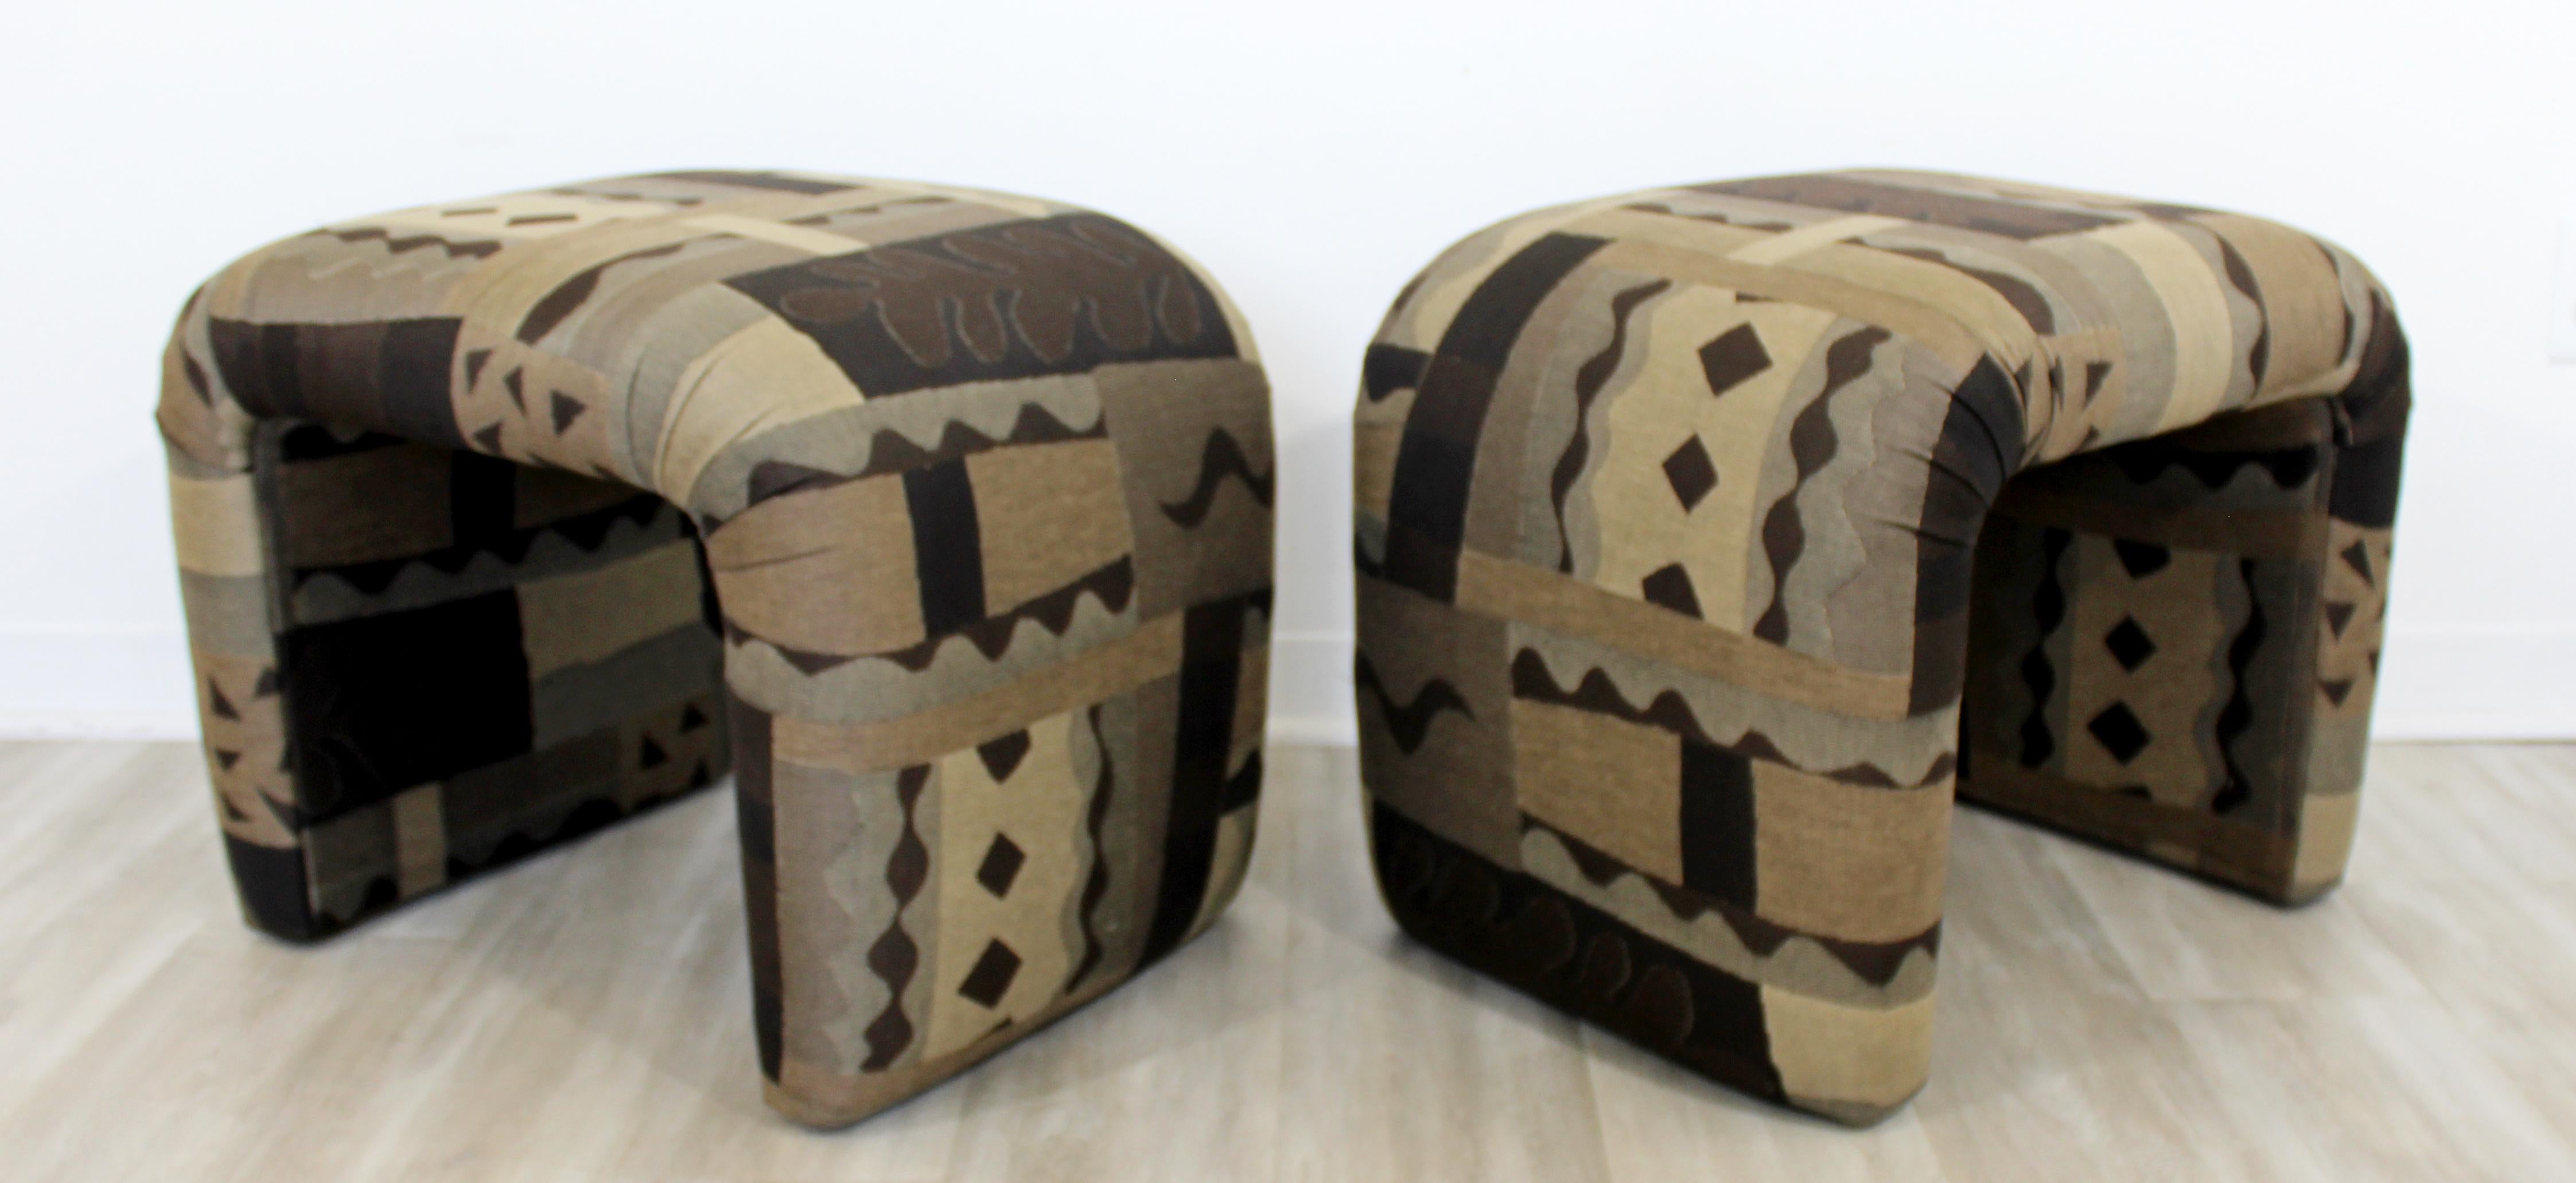 Late 20th Century Mid-Century Modern Pair of Waterfall Benches Stools Ottomans Milo Baughman Style